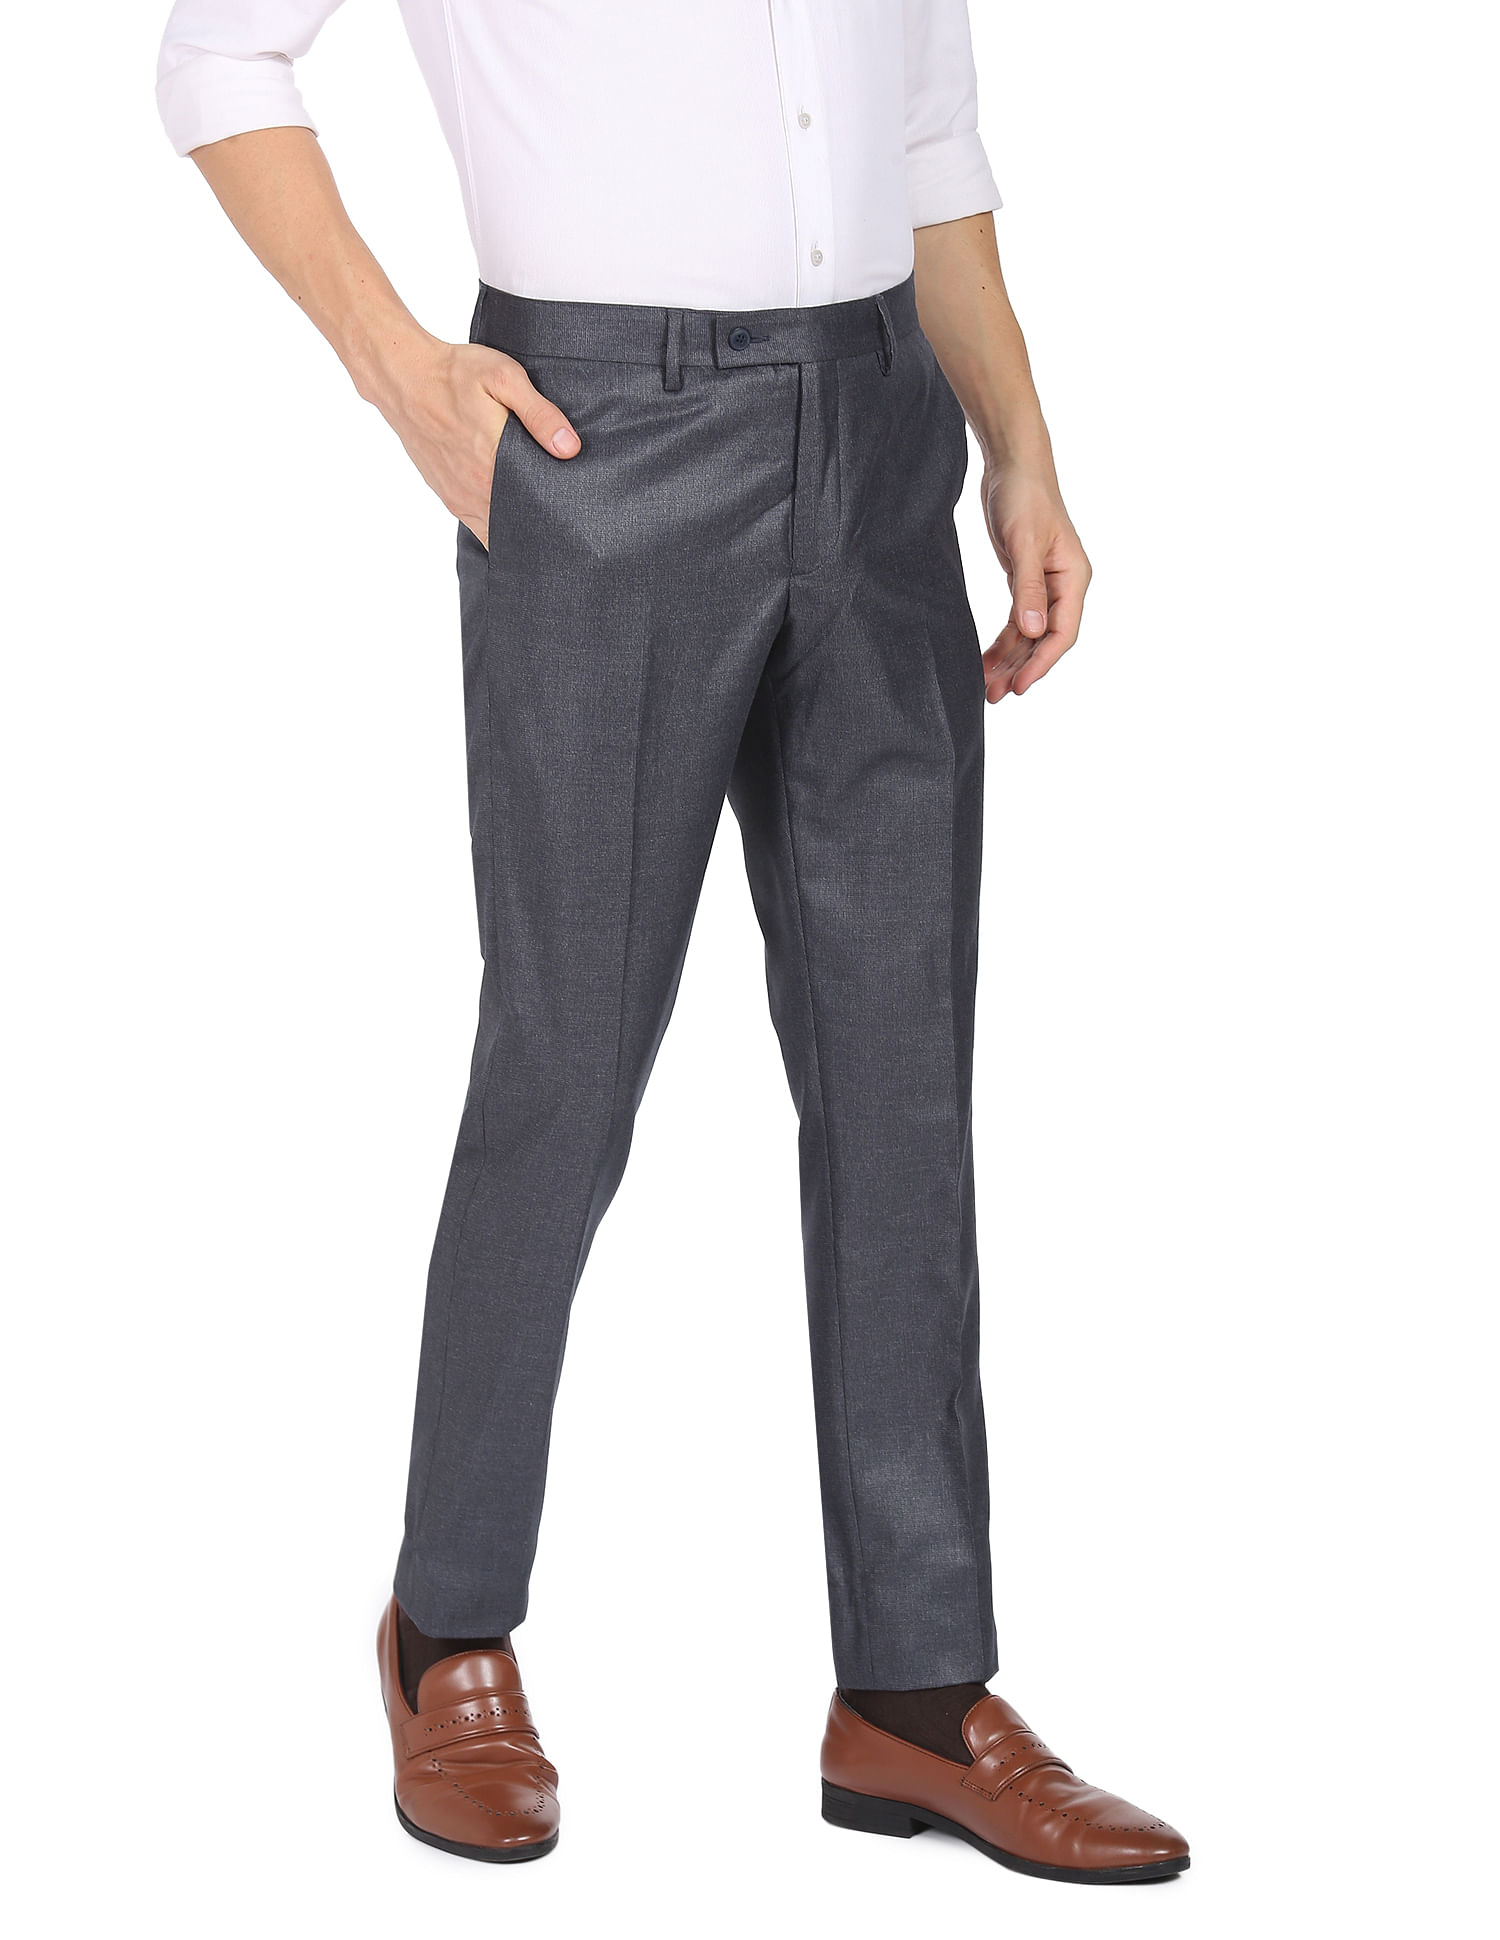 Mens Cotton Pants  Old Navy